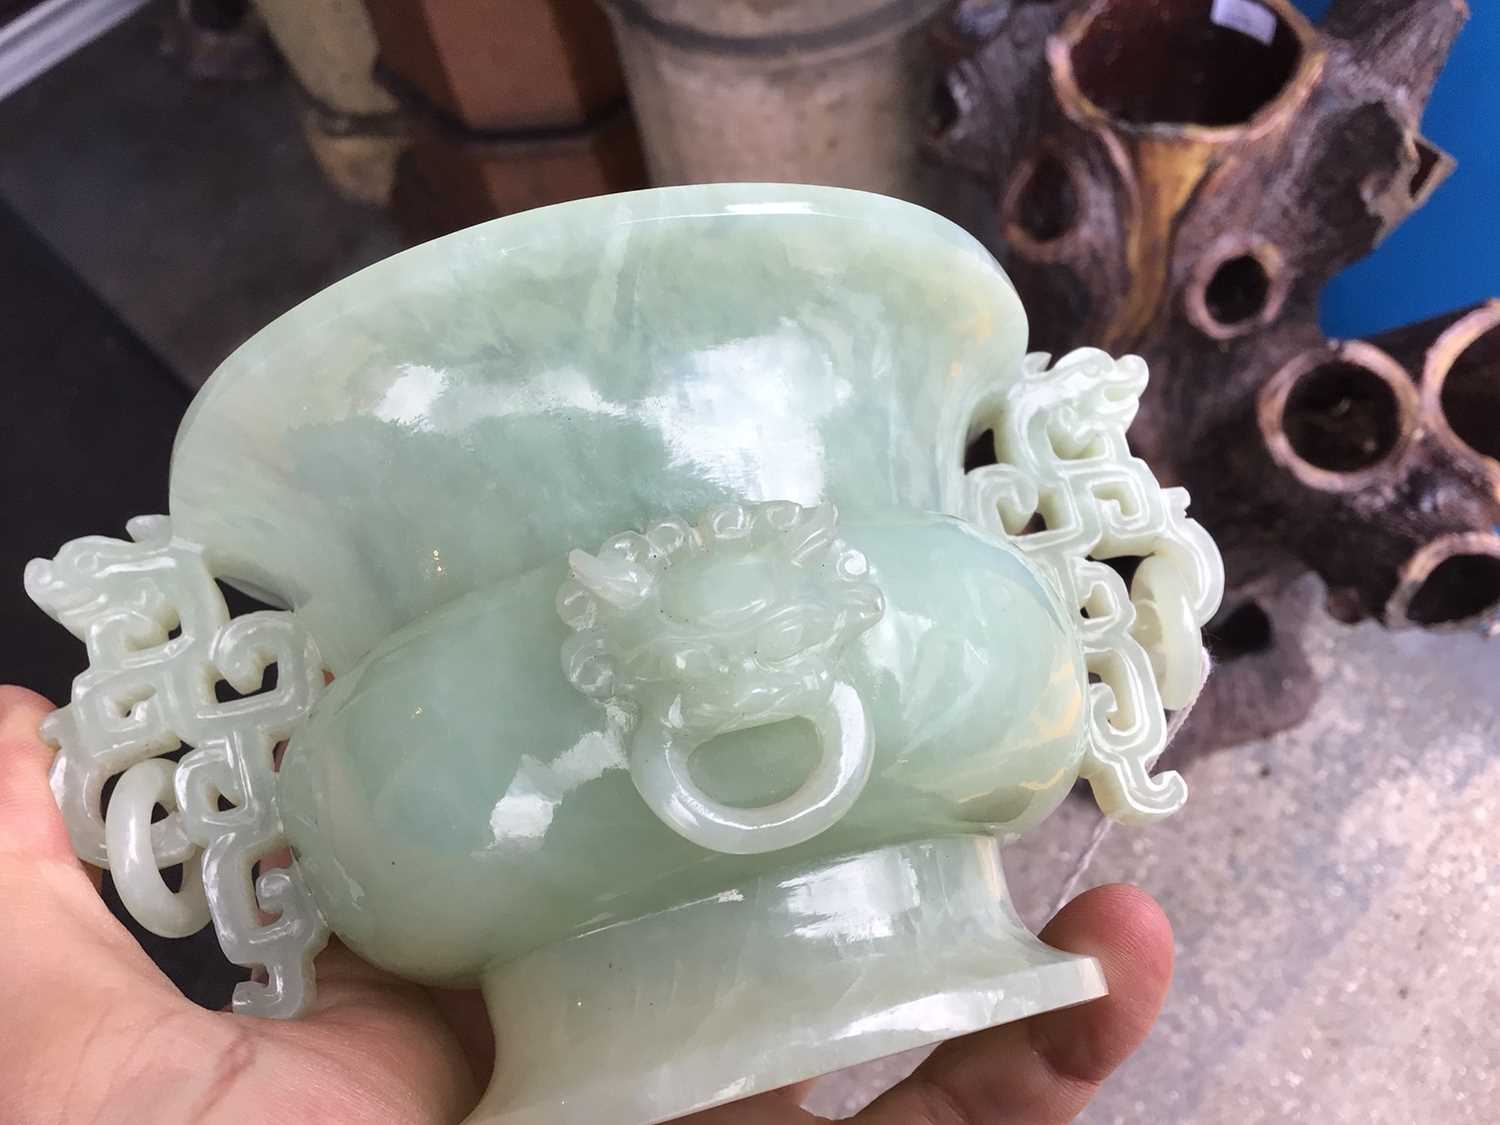 Chinese carved green jade vase on wooden stand - Image 3 of 6